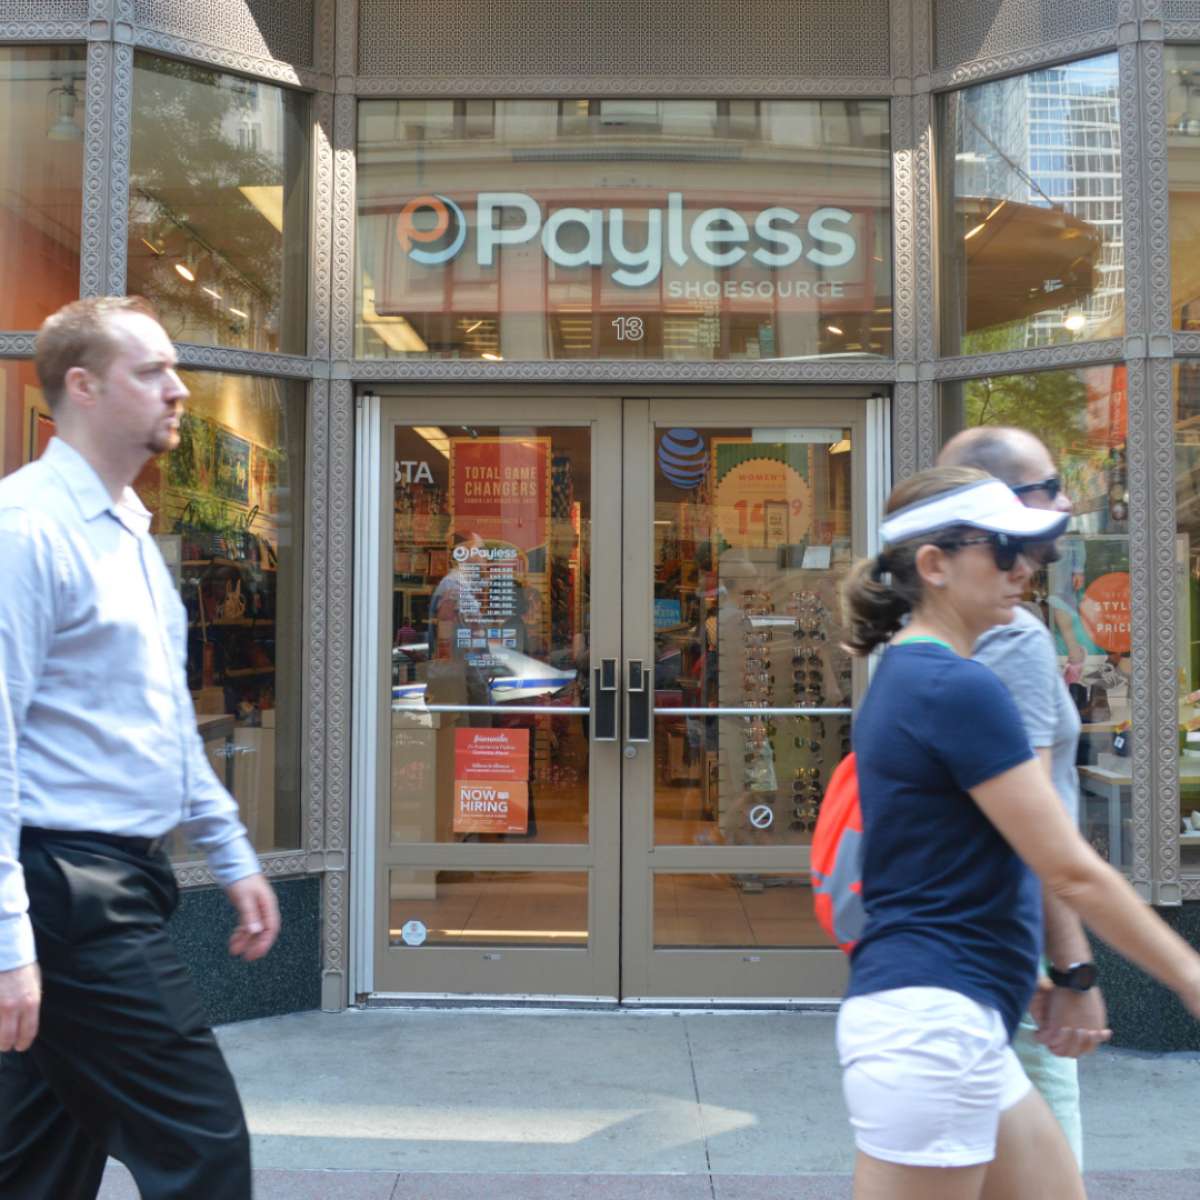 Payless ShoeSource | Loop Chicago